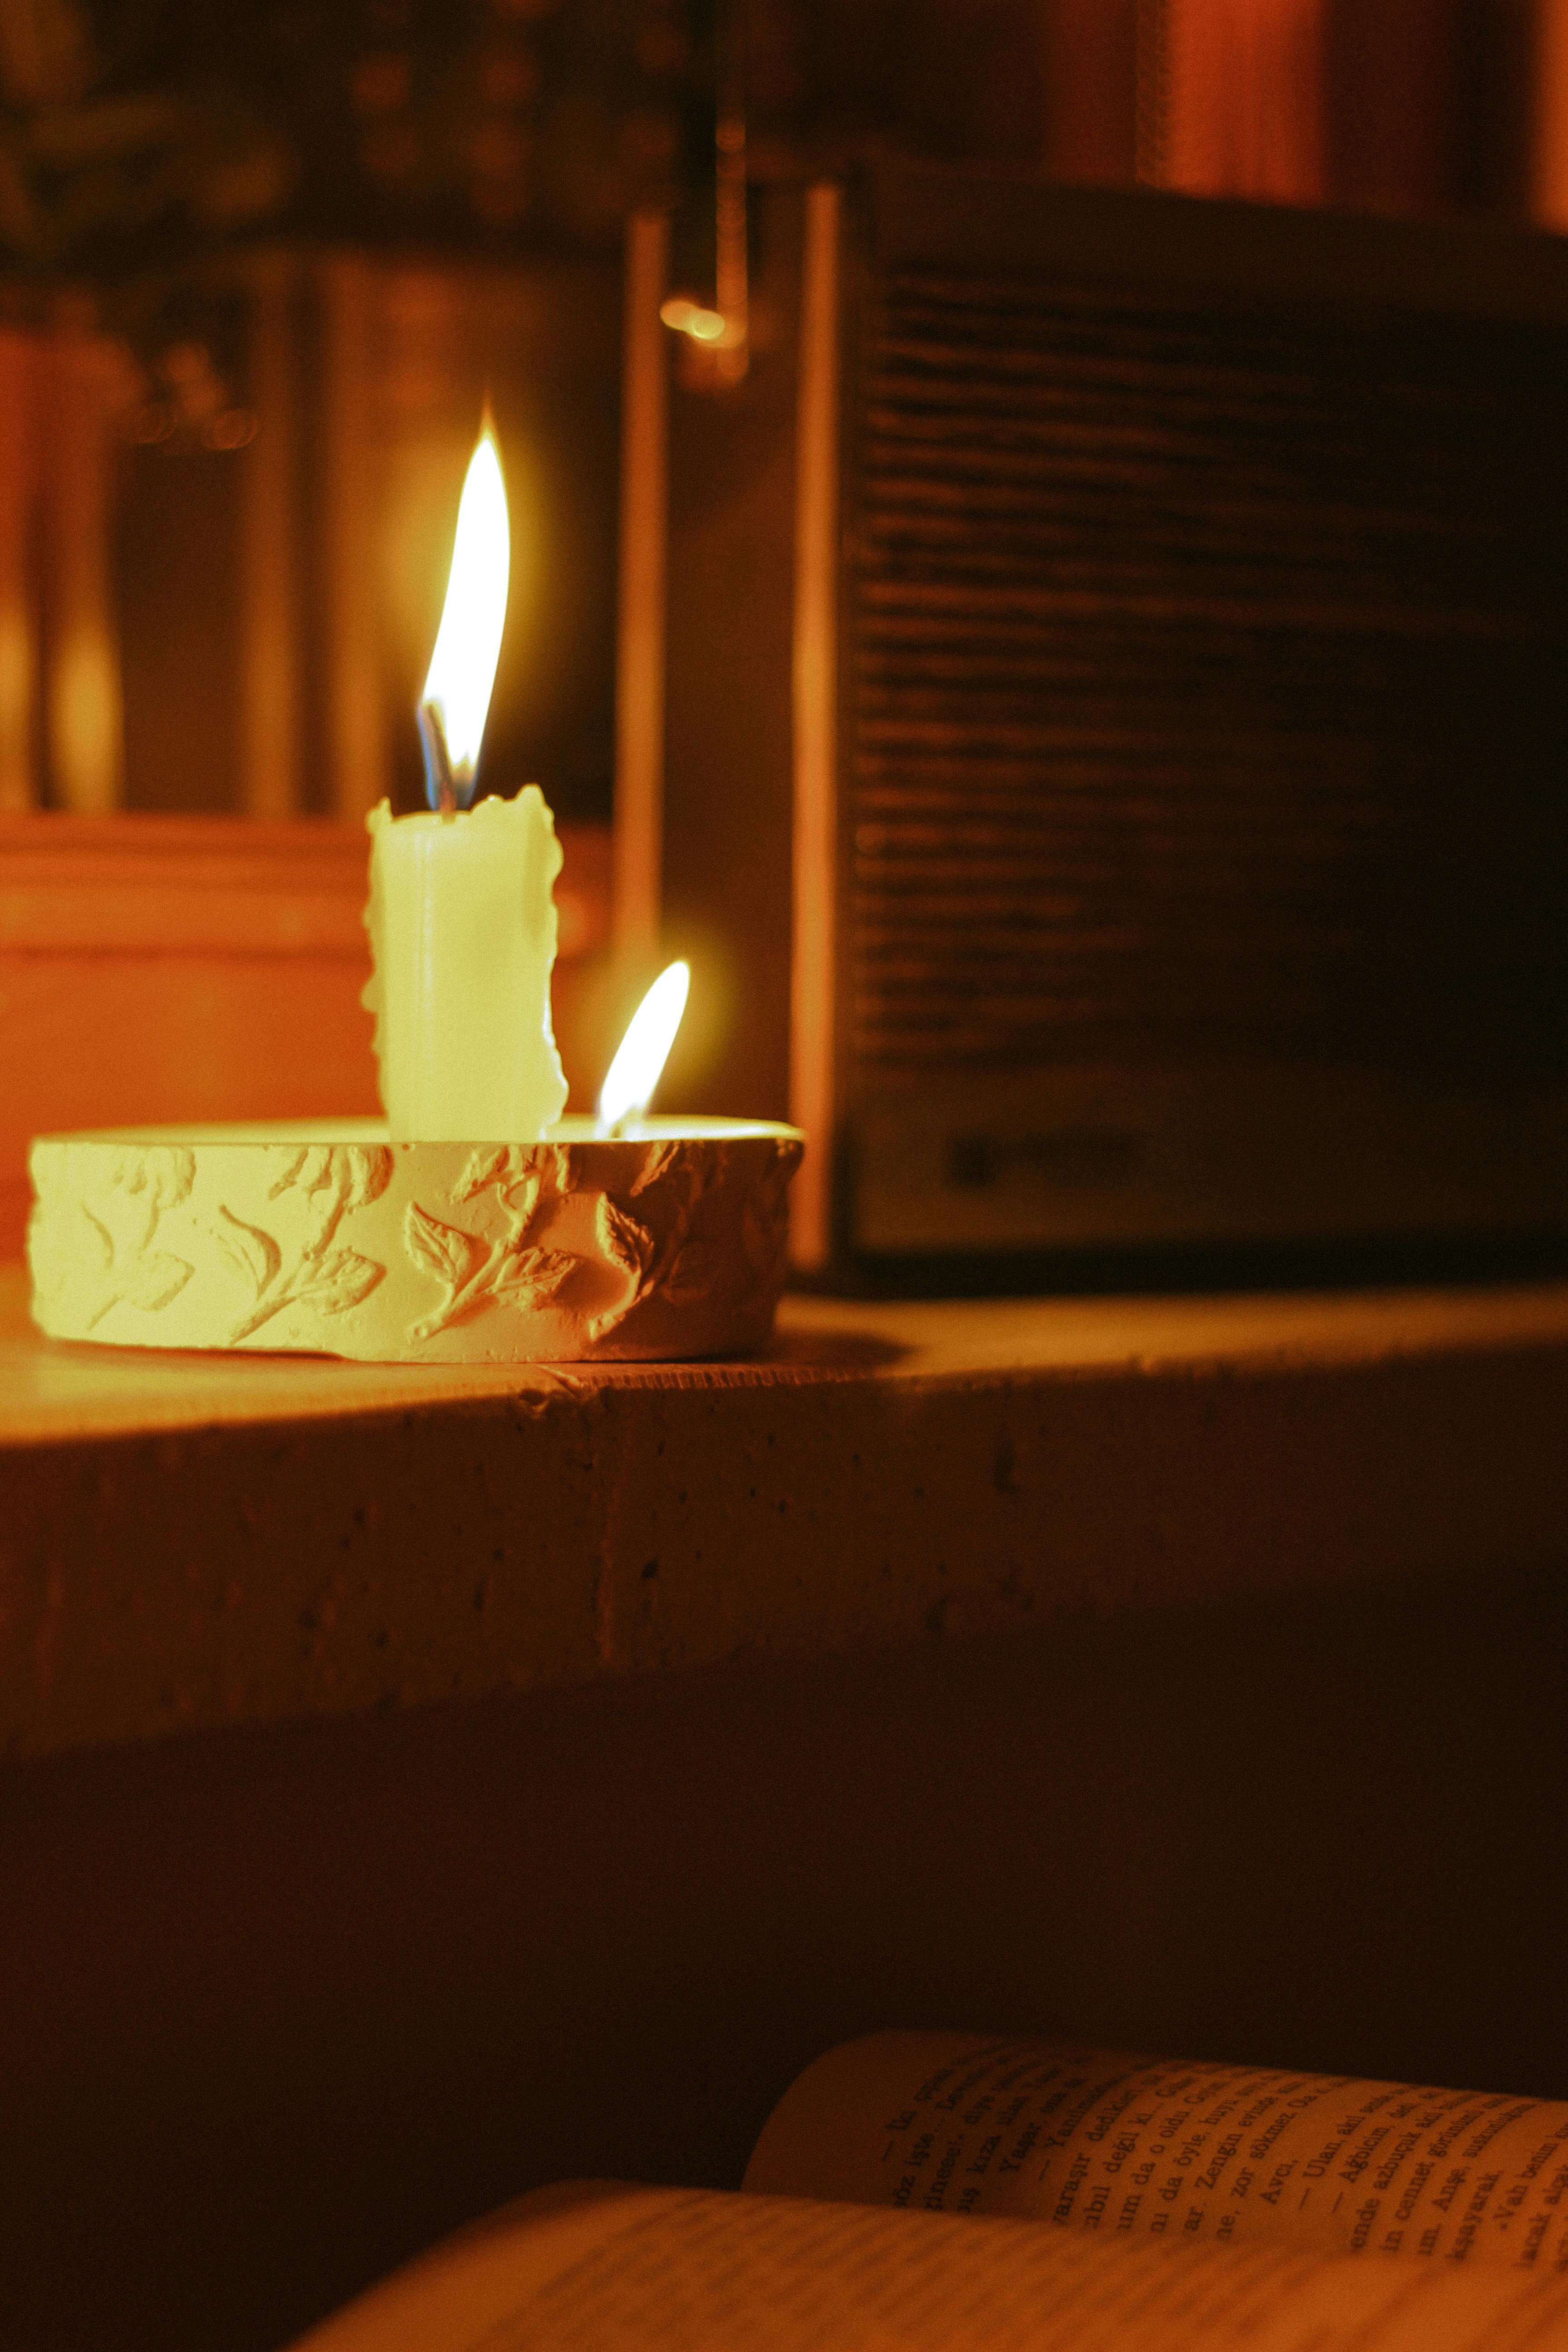 3,324 Cast Candle Royalty-Free Photos and Stock Images